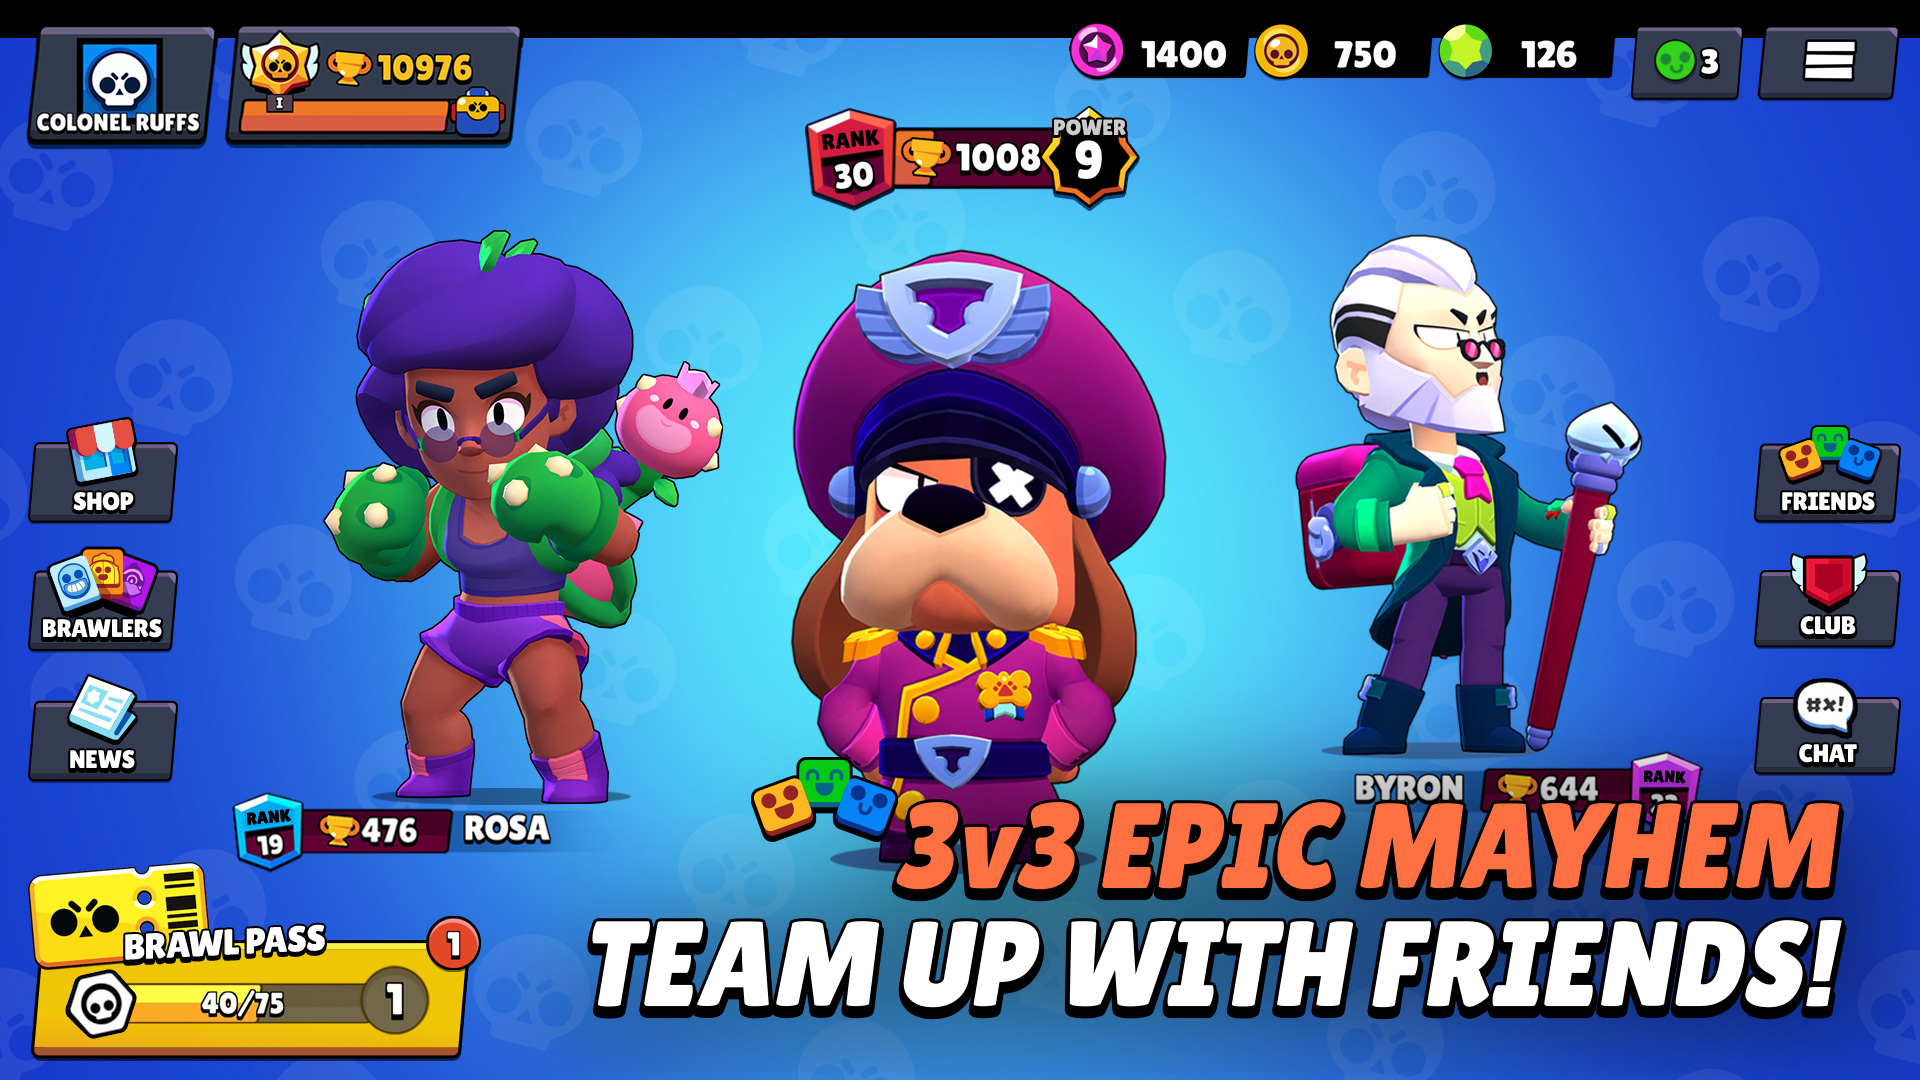 Brawl Stars Apk 36 270 Download For Android Download Brawl Stars Apk Latest Version Apkfab Com - brawl star date nouveau brawlzr